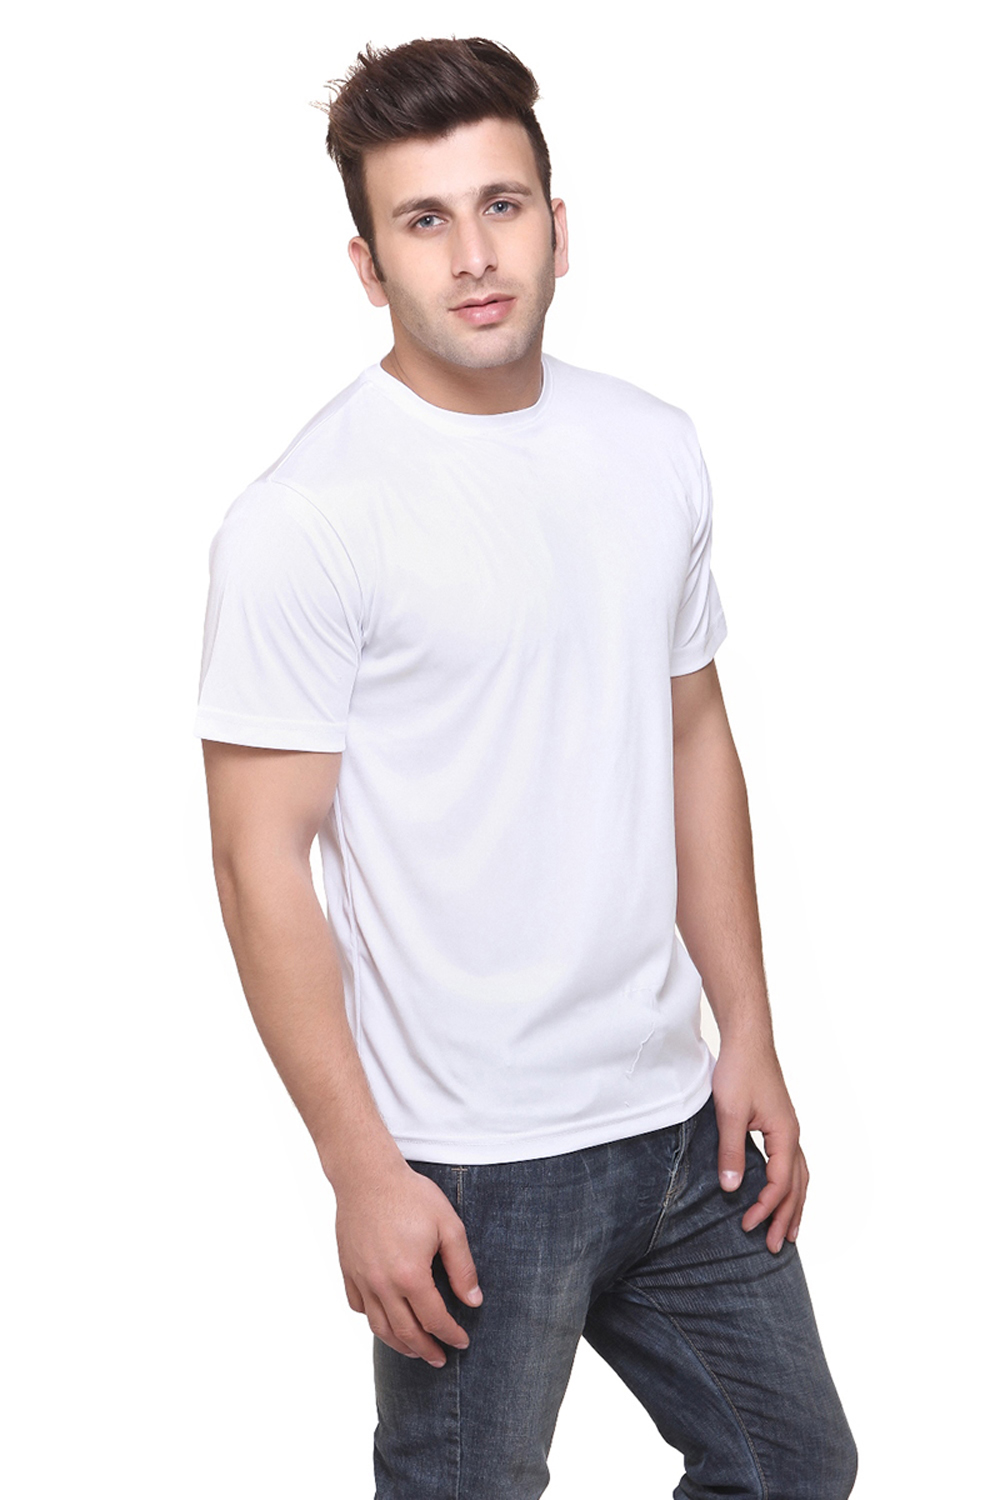 Buy Ketex Men's Multicolored Solid Round Neck Polyester Blended TShirt ...